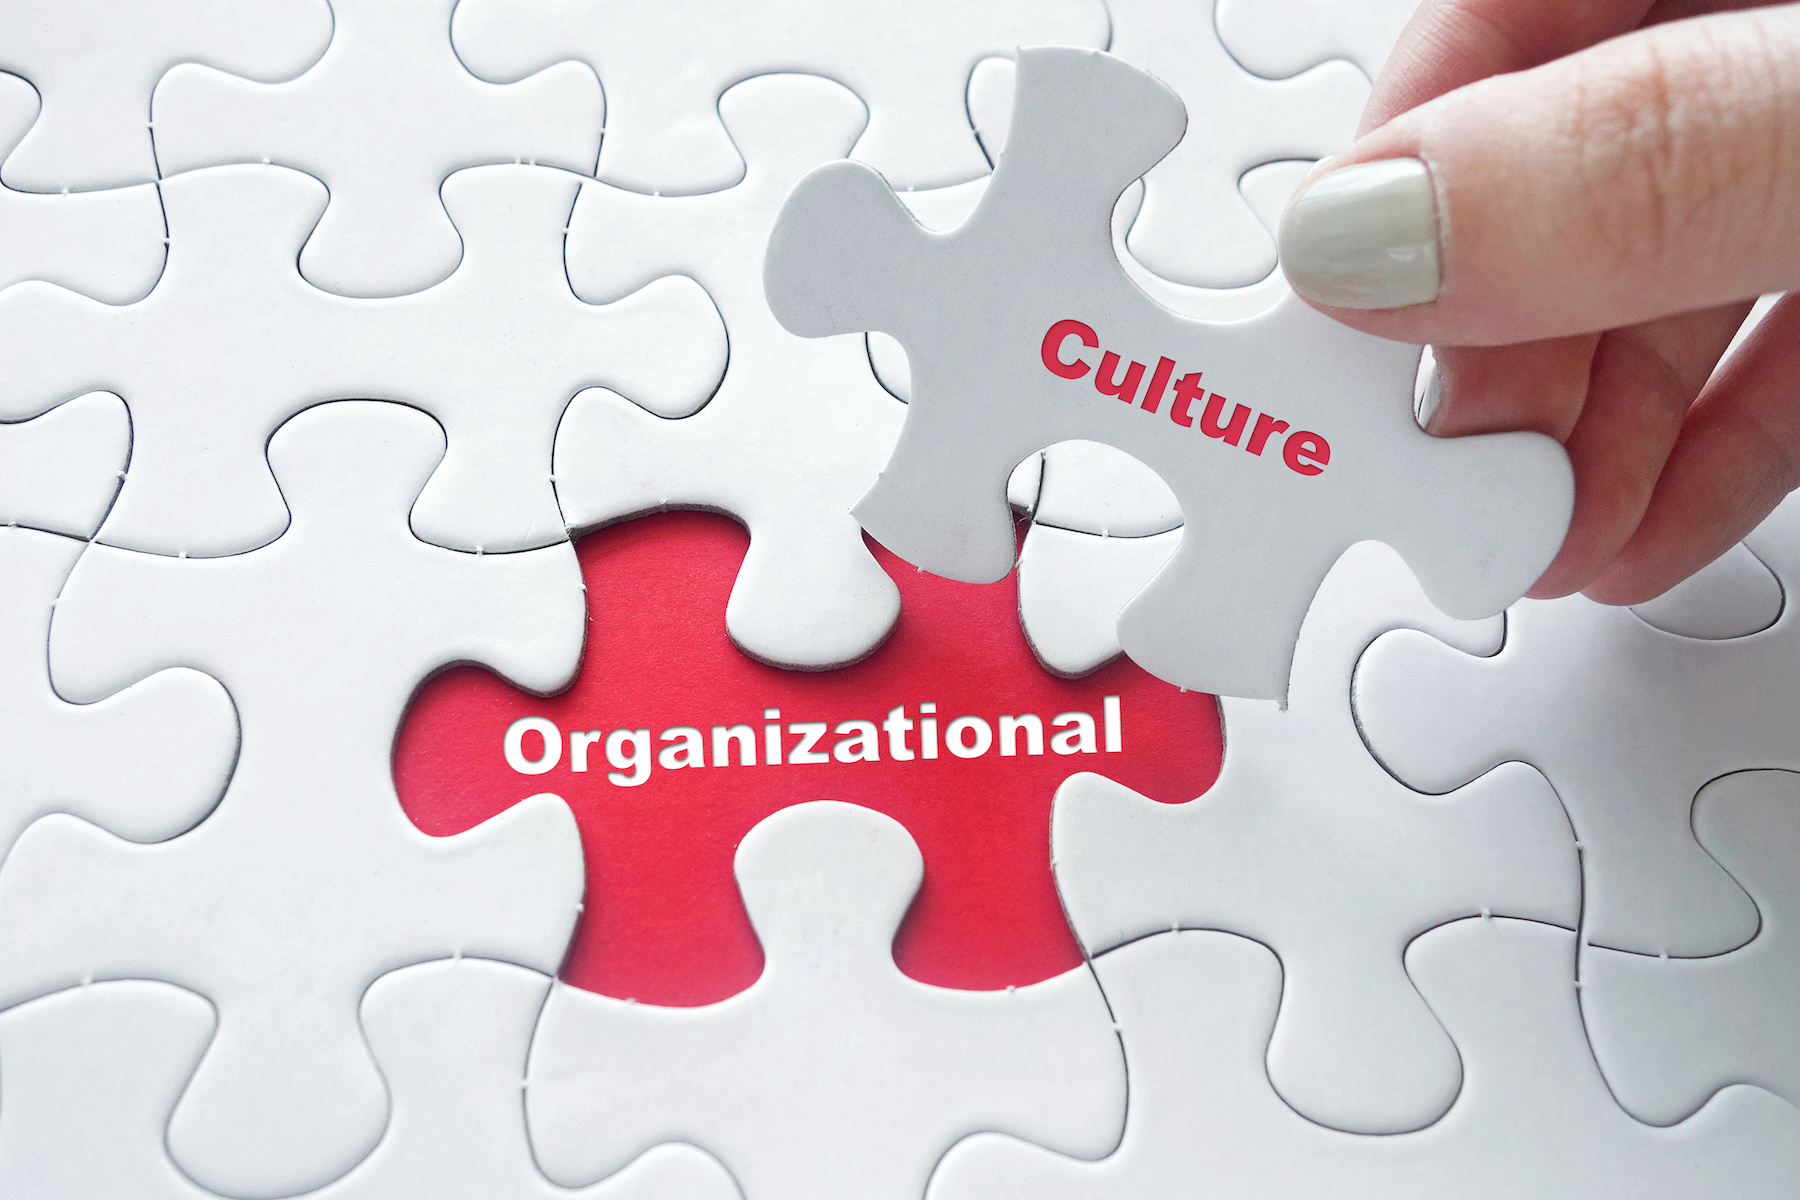 The word "culture" as the missing piece to a puzzle, fitting with the word "organizational"